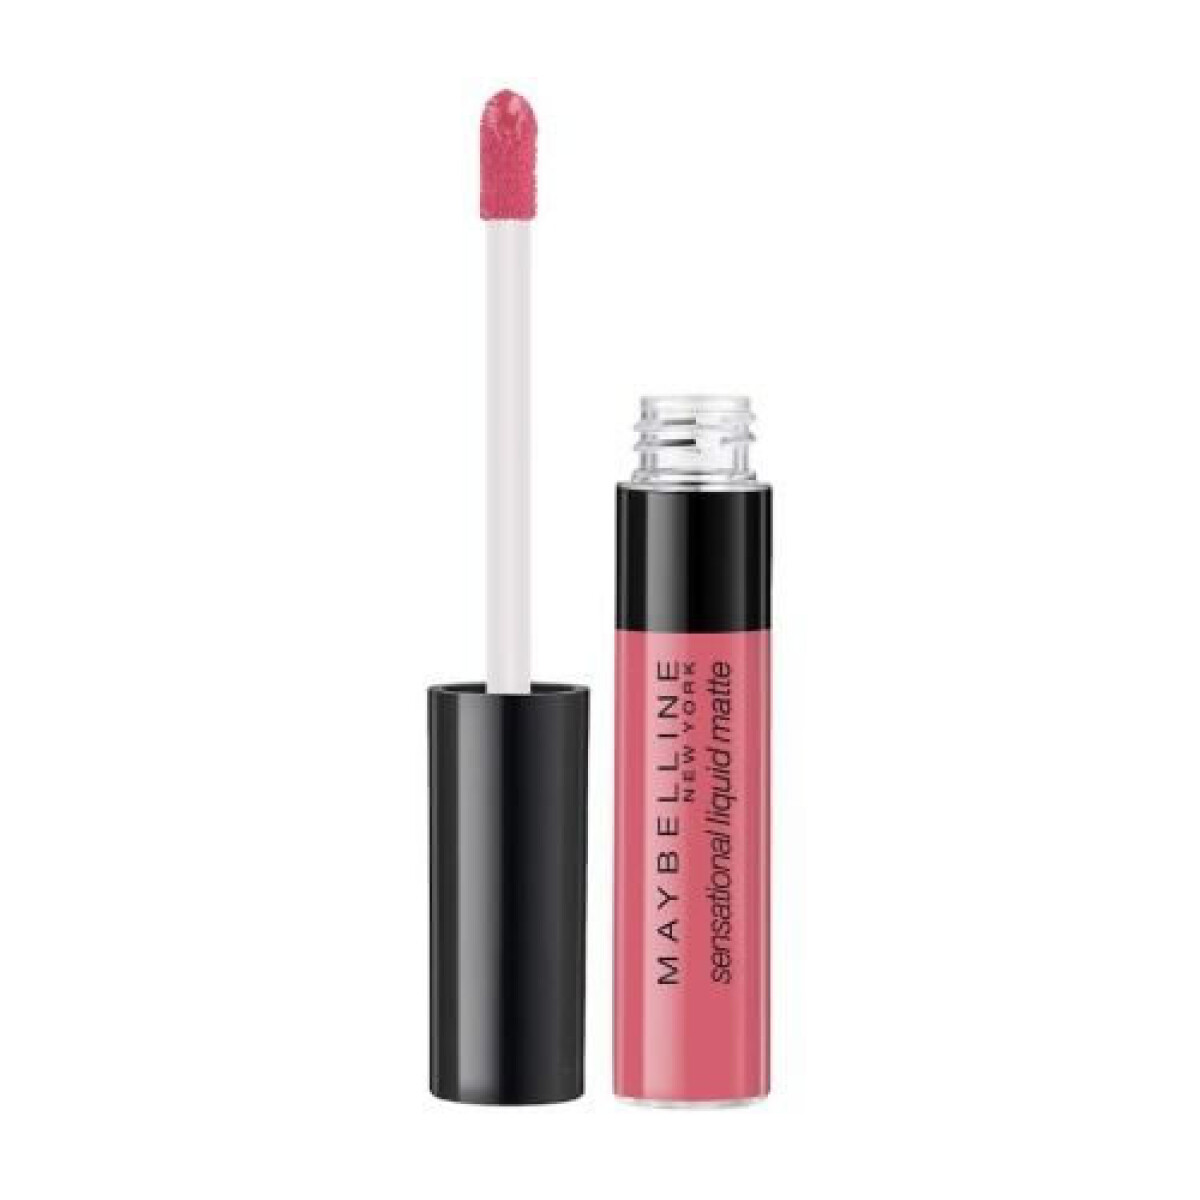 LABIAL LIQUIDO MATE MAYBELLINE EASY BERRY 